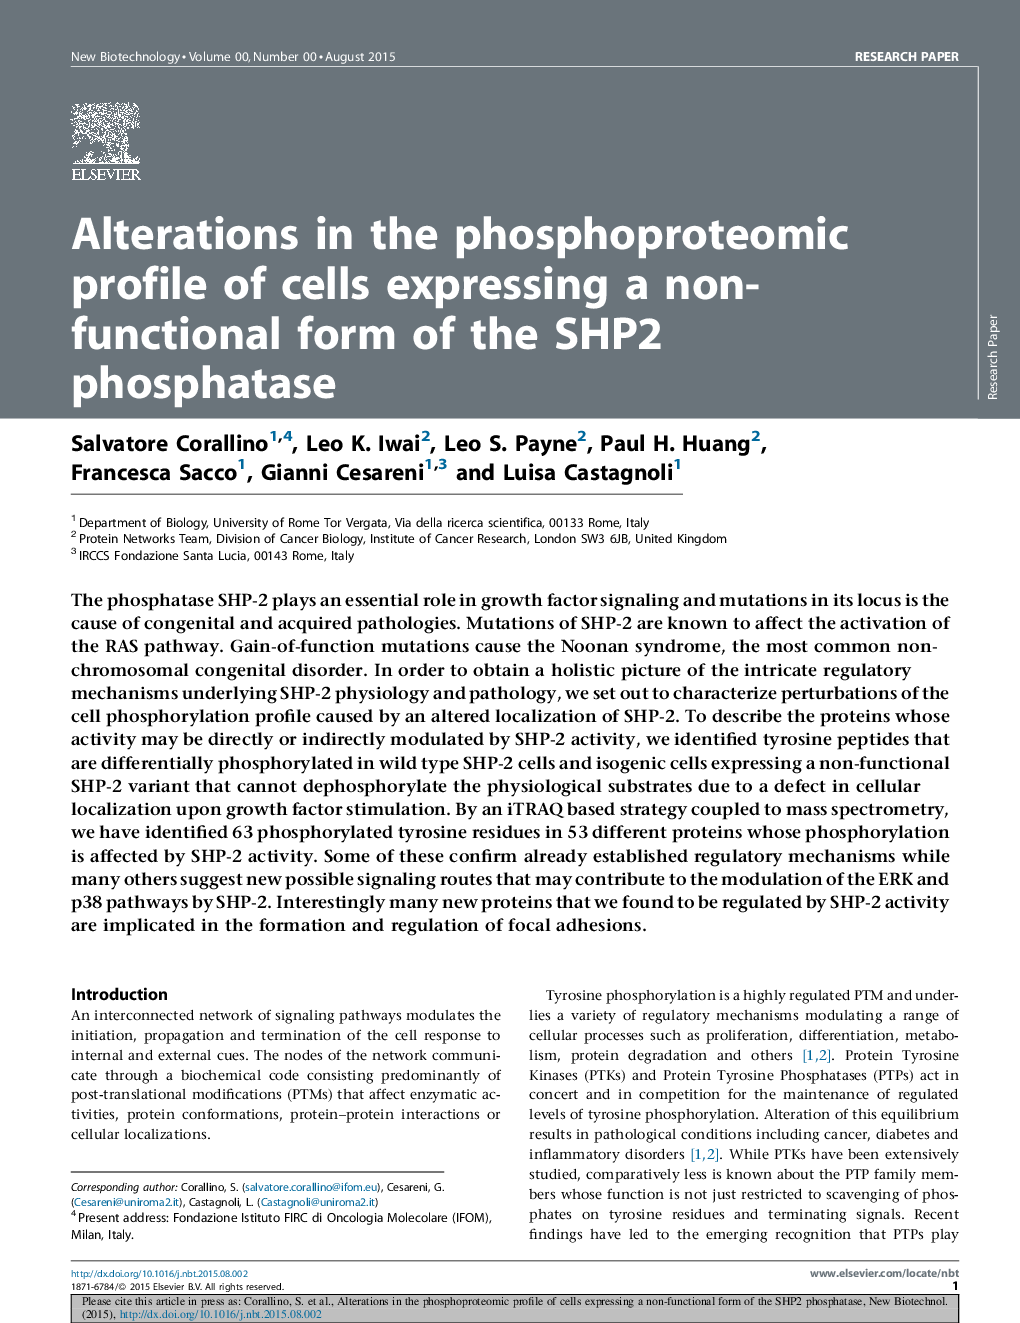 Alterations in the phosphoproteomic profile of cells expressing a non-functional form of the SHP2 phosphatase